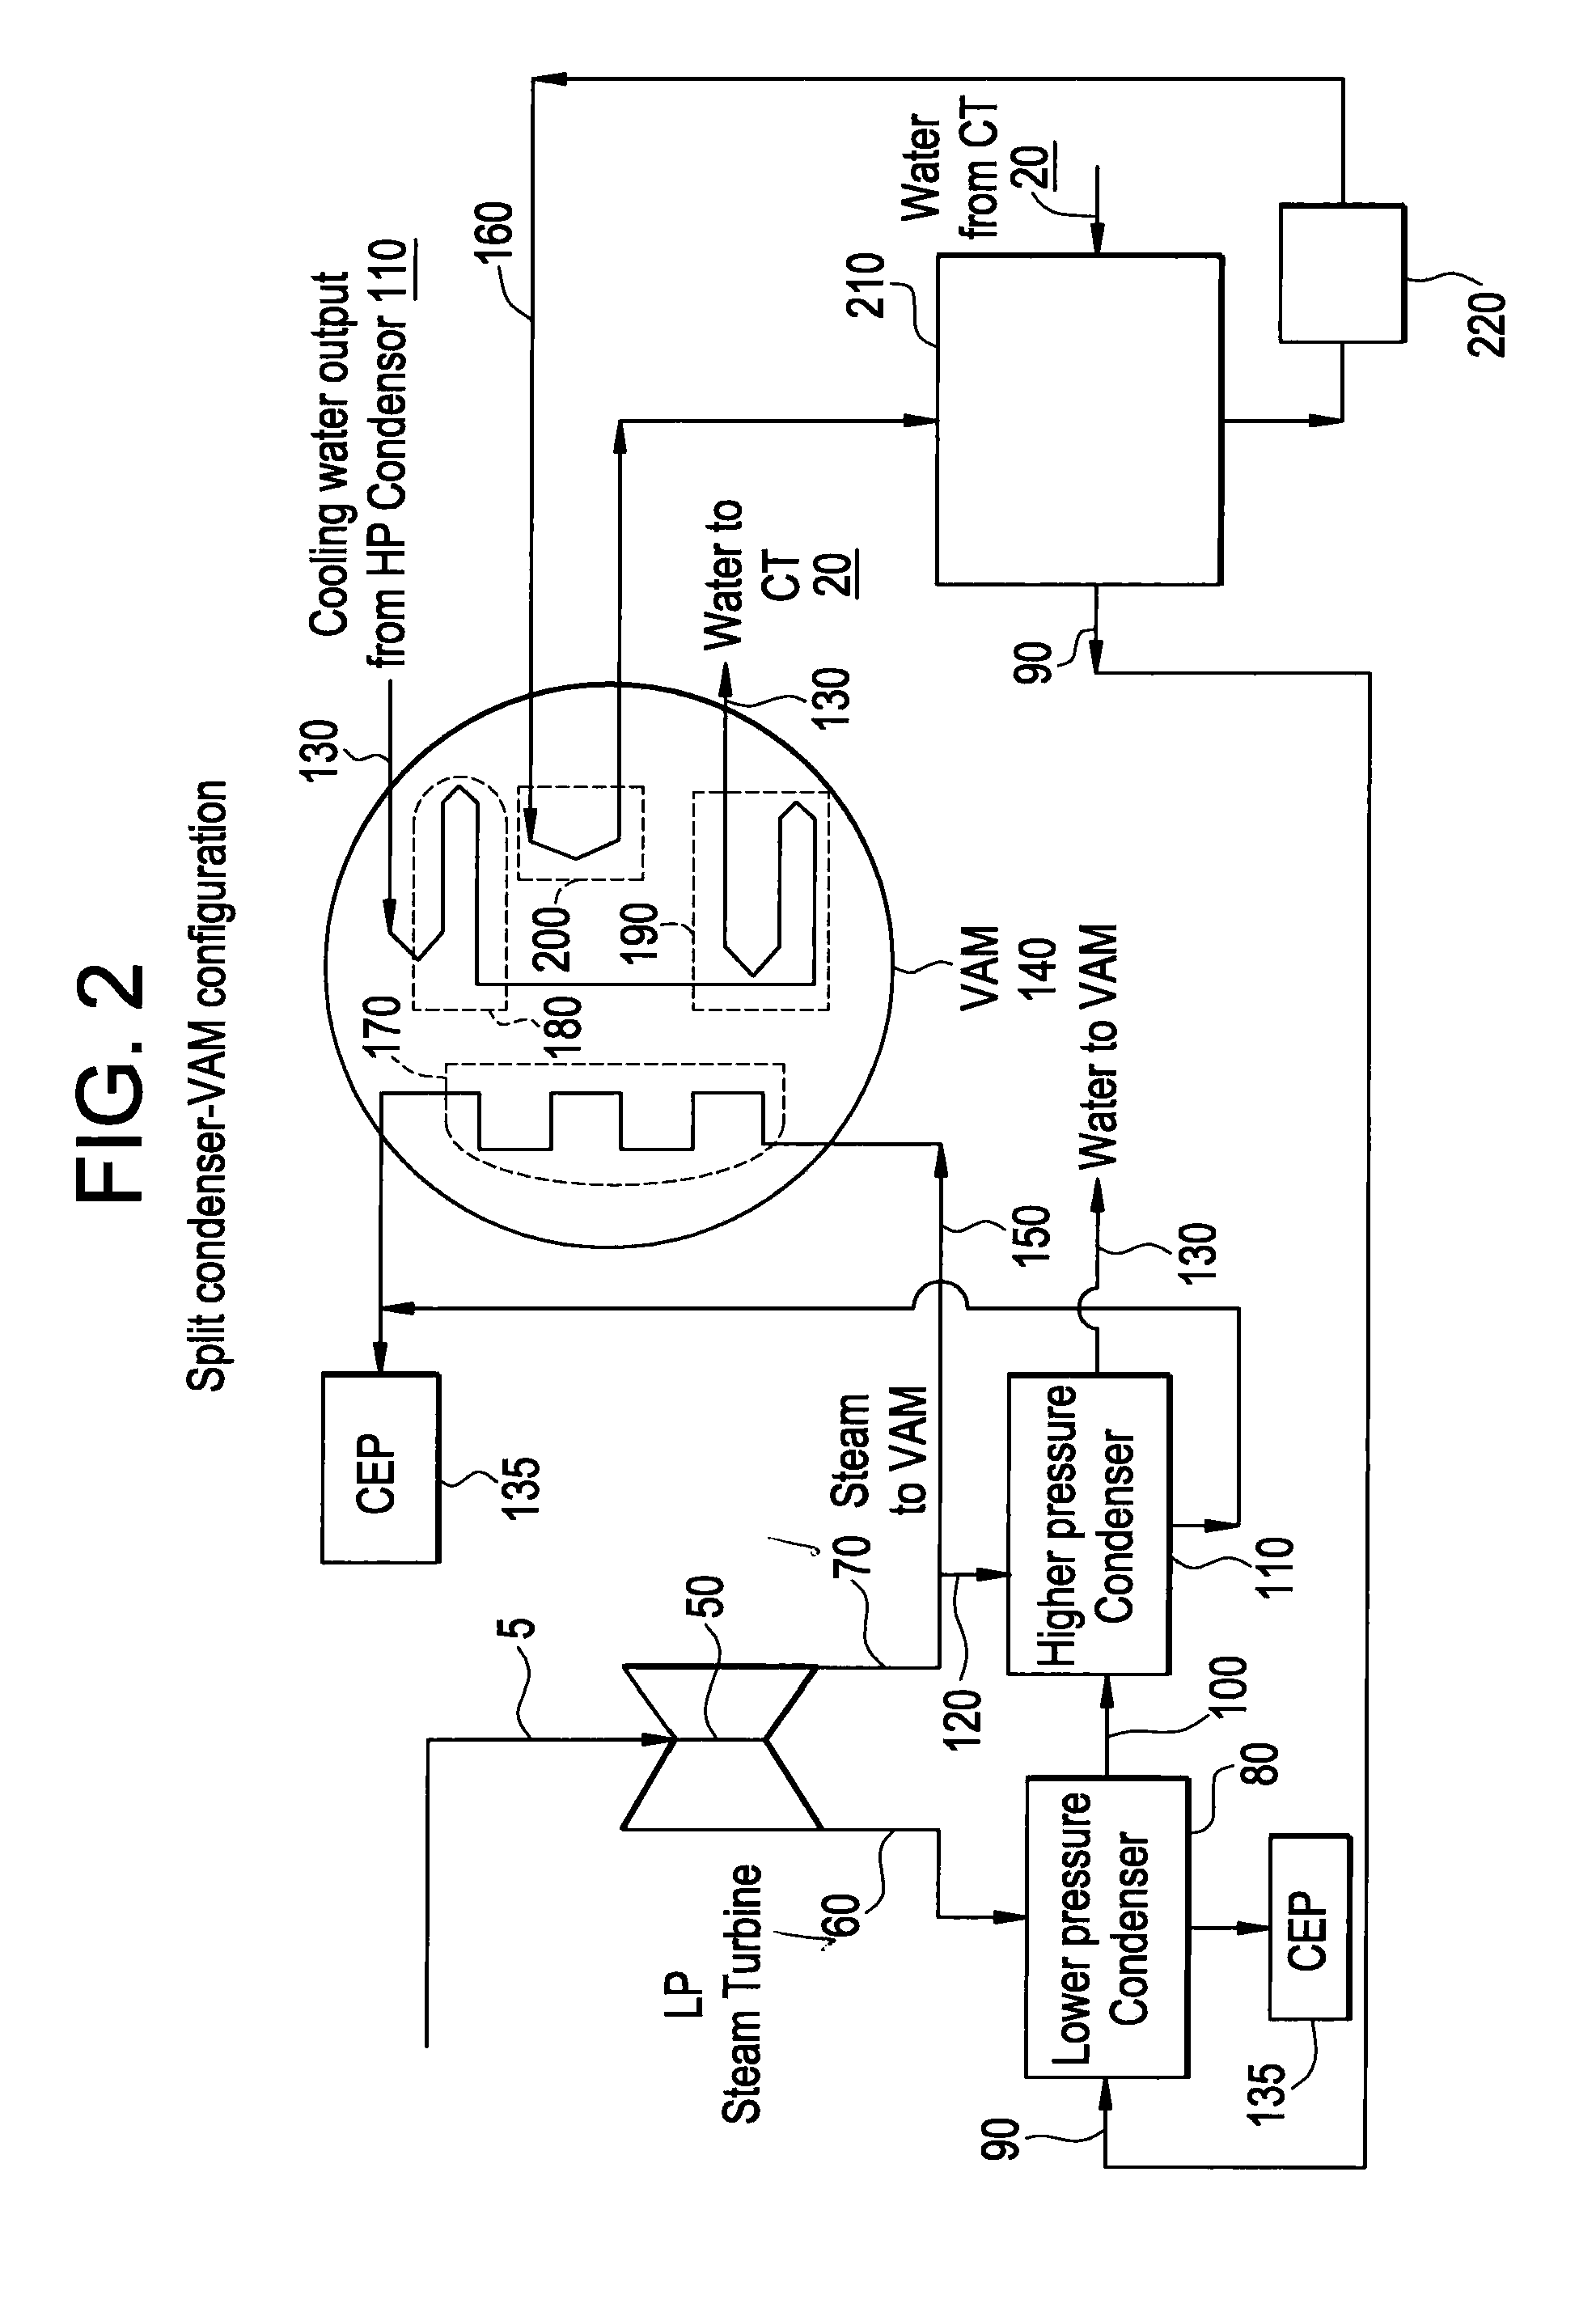 System and method for use in a combined or rankine cycle power plant